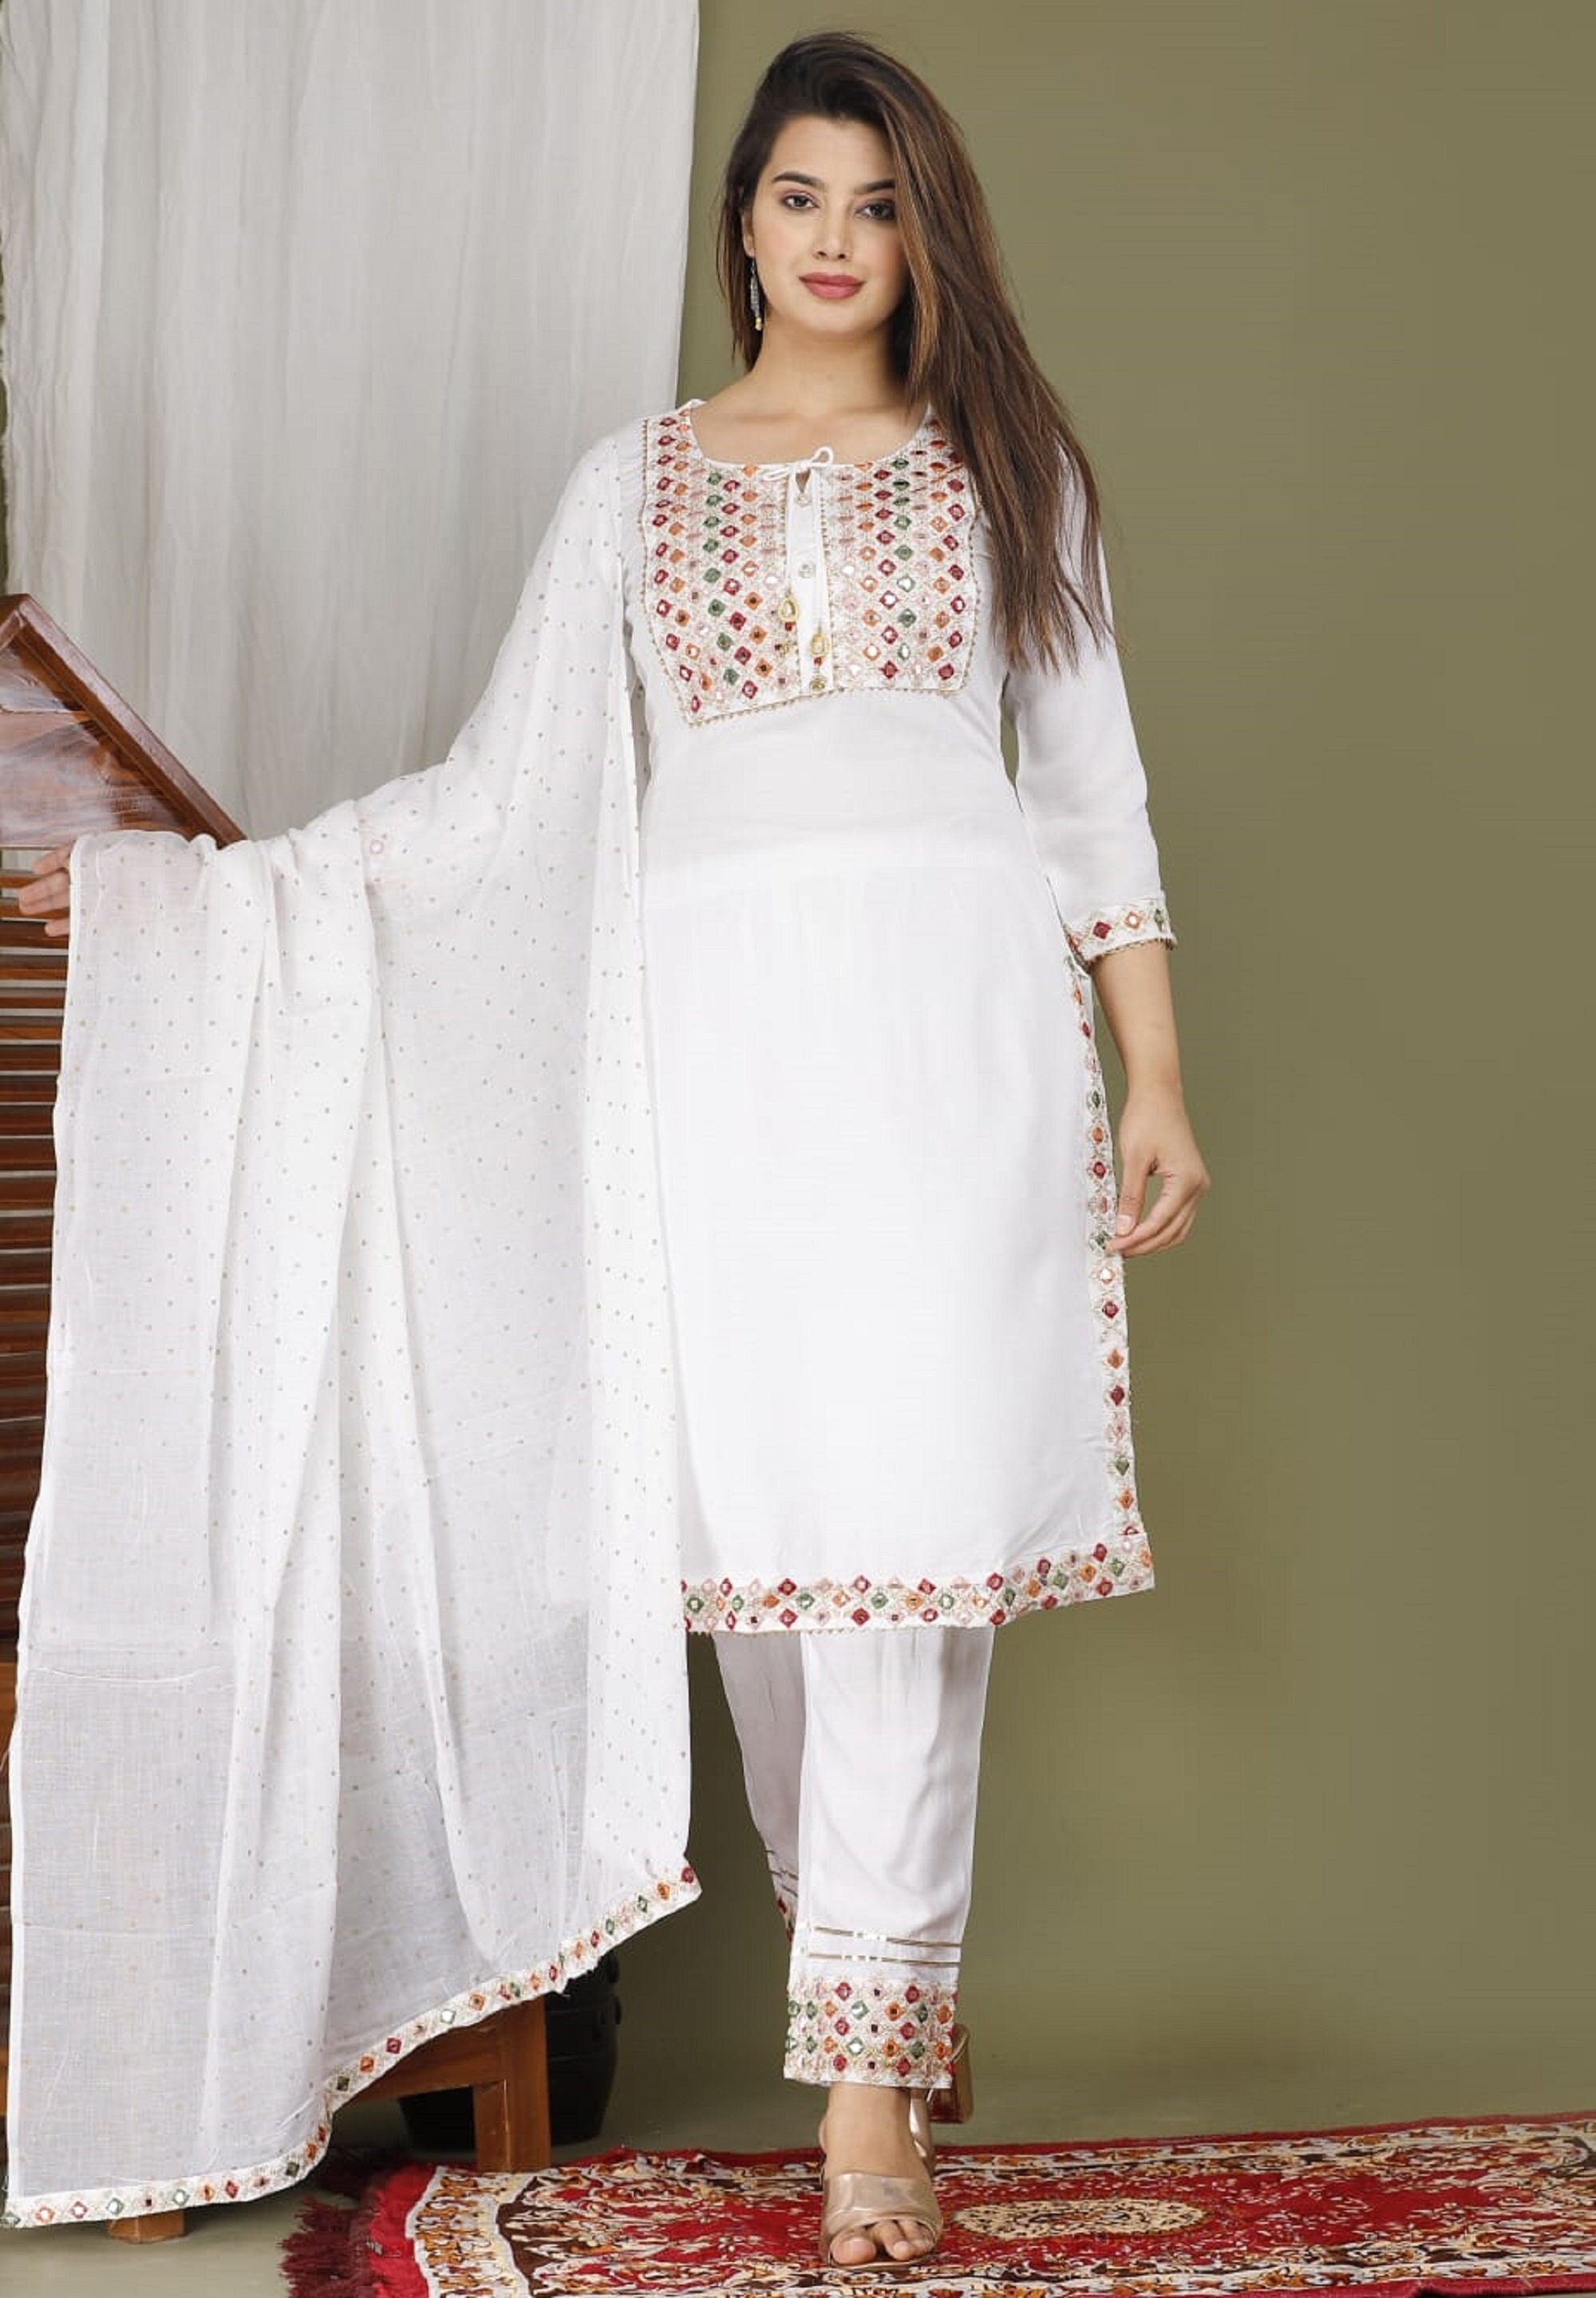 Complete Stitched. Indian Women Designer Ankle Length Embroidrey Work White Kurti  Pant With Stylish Dupatta Dress. Wedding Partywear Dress. -  Israel